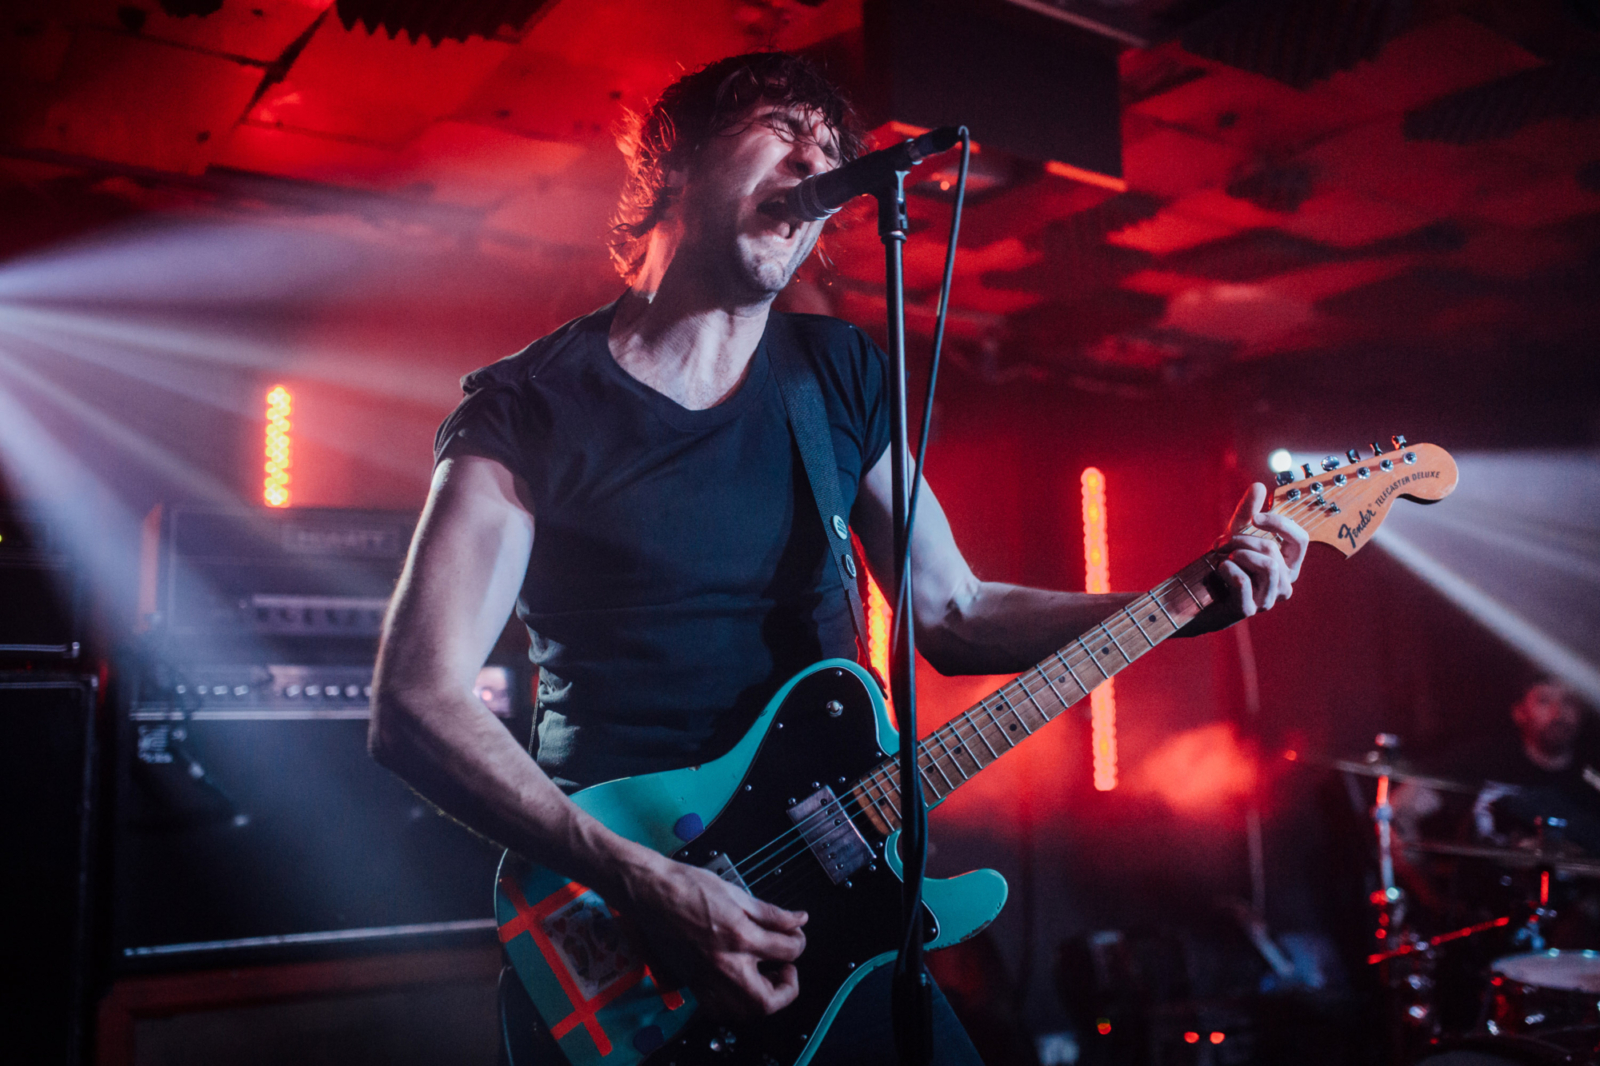 Win a pair of tickets to see Japandroids on their UK tour